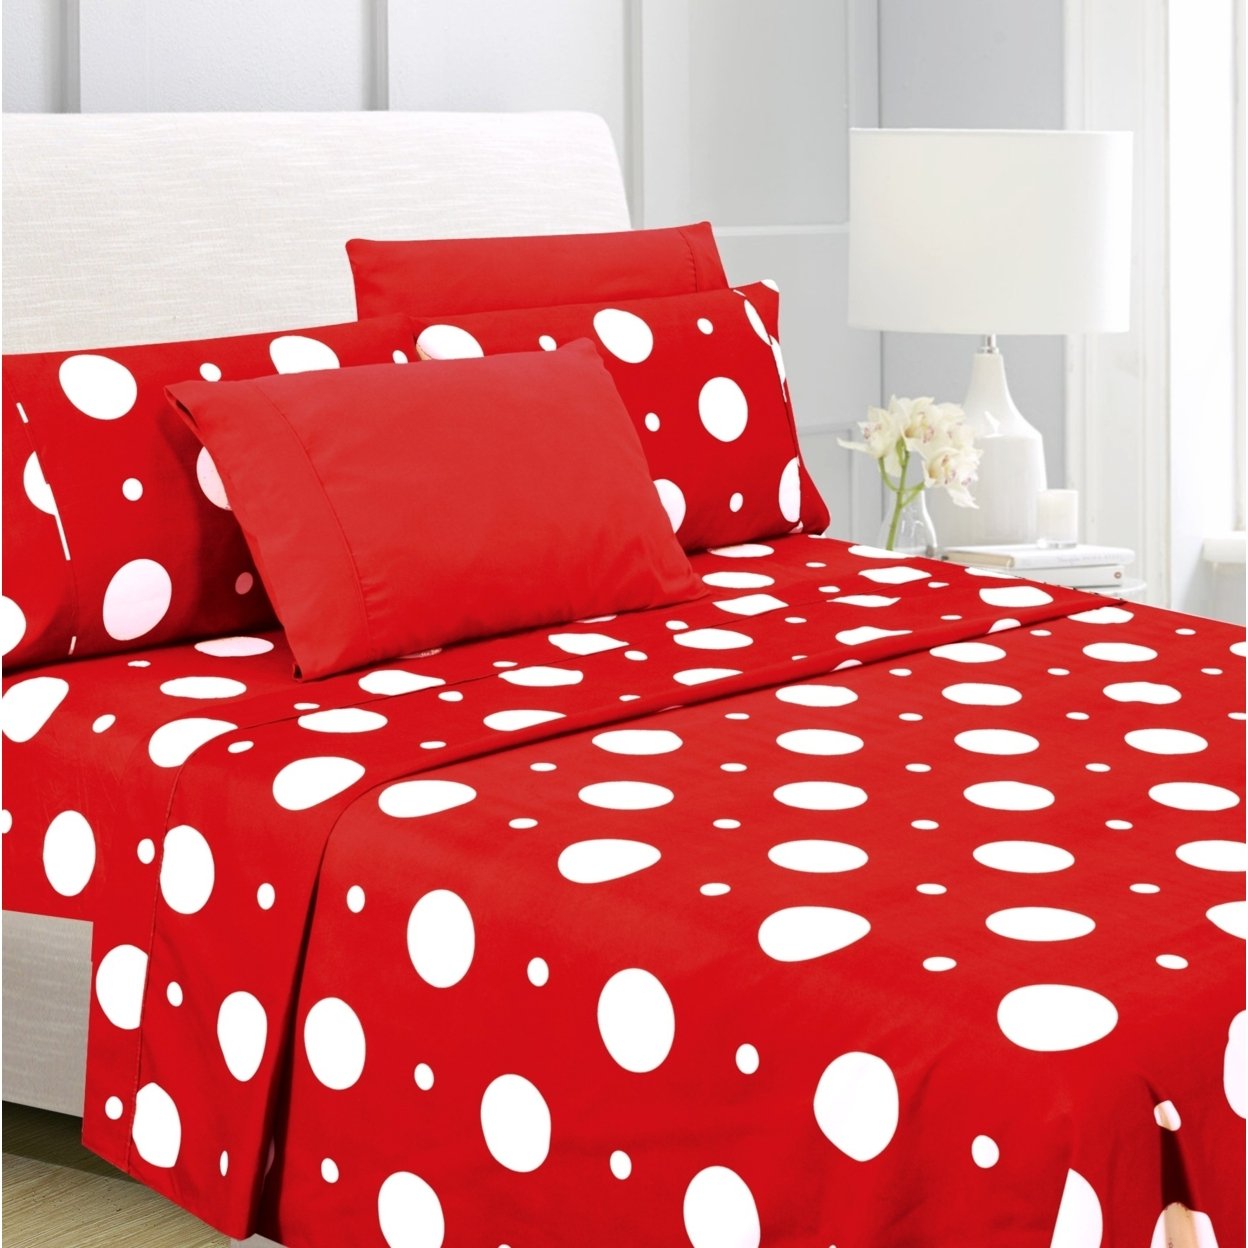 American Home Collection Ultra Soft 4-6 Piece Polka Dot Printed Bed Sheet Set - Full, Red